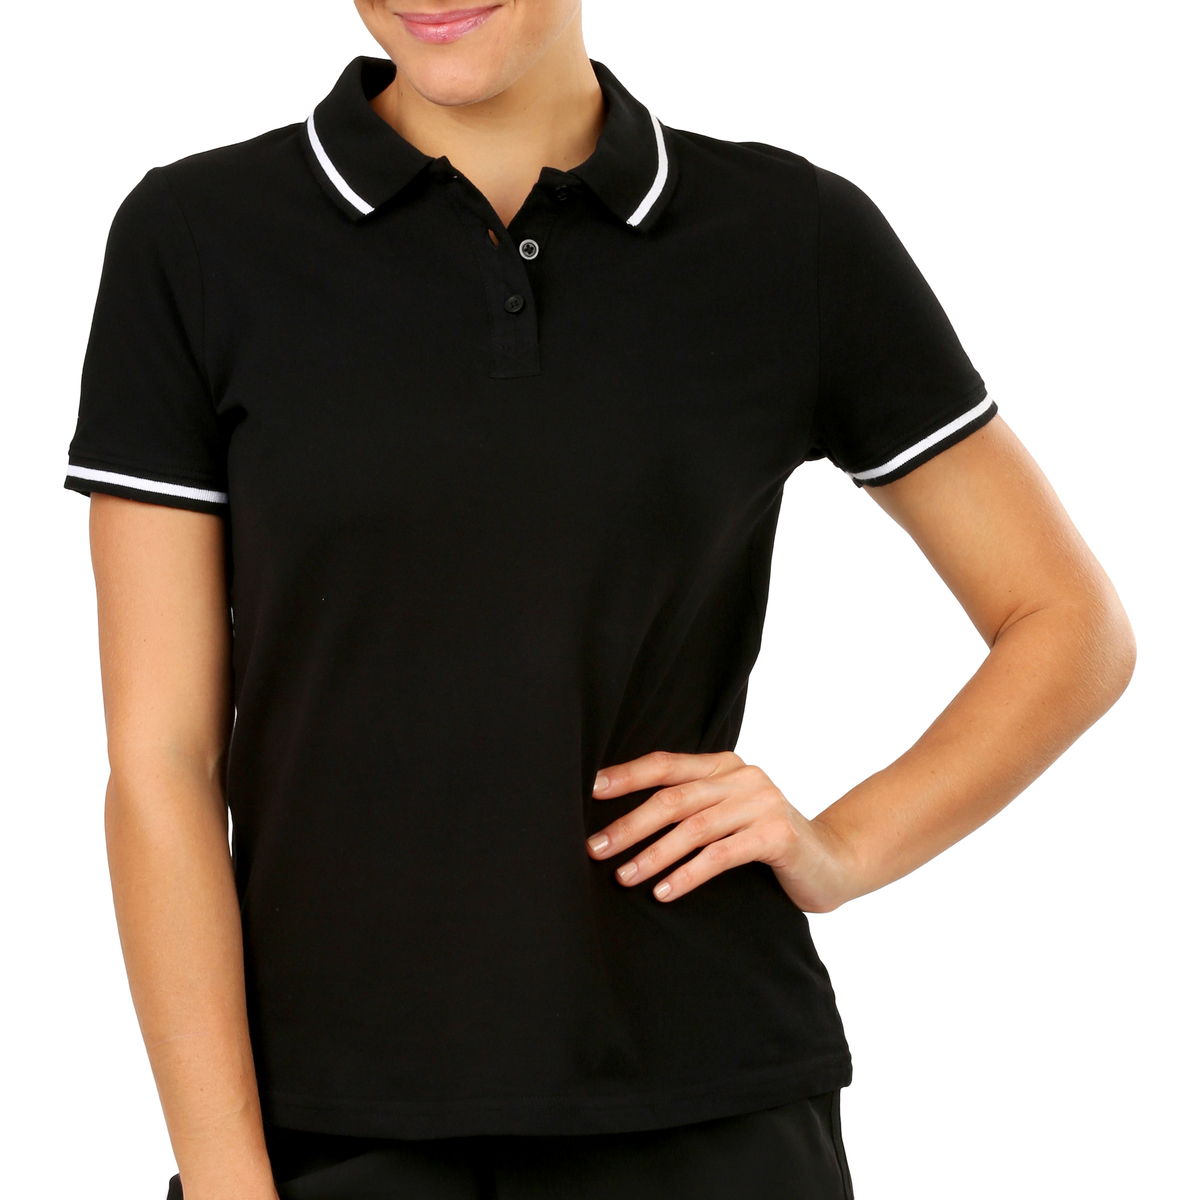 women's polo t shirts on sale